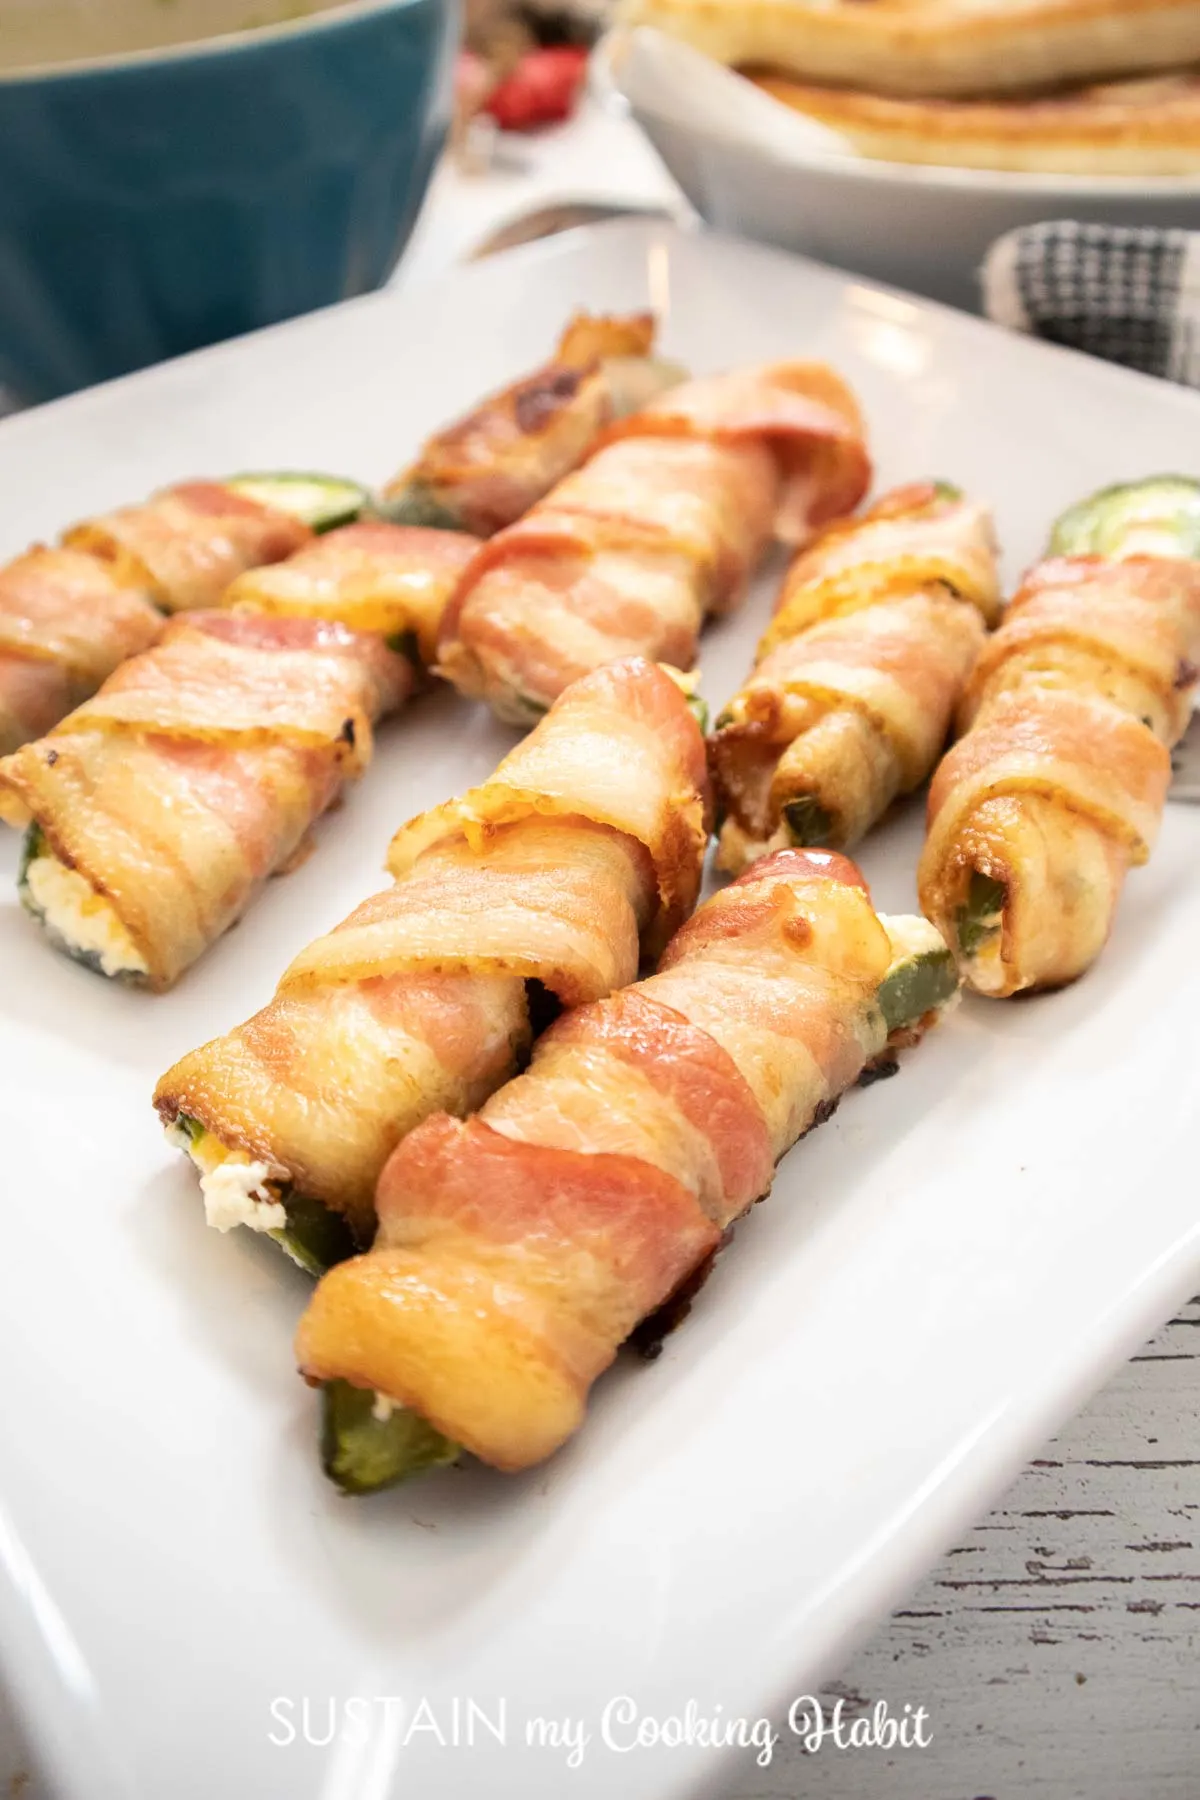 Bacon wrapped jalapeno poppers on a plate.